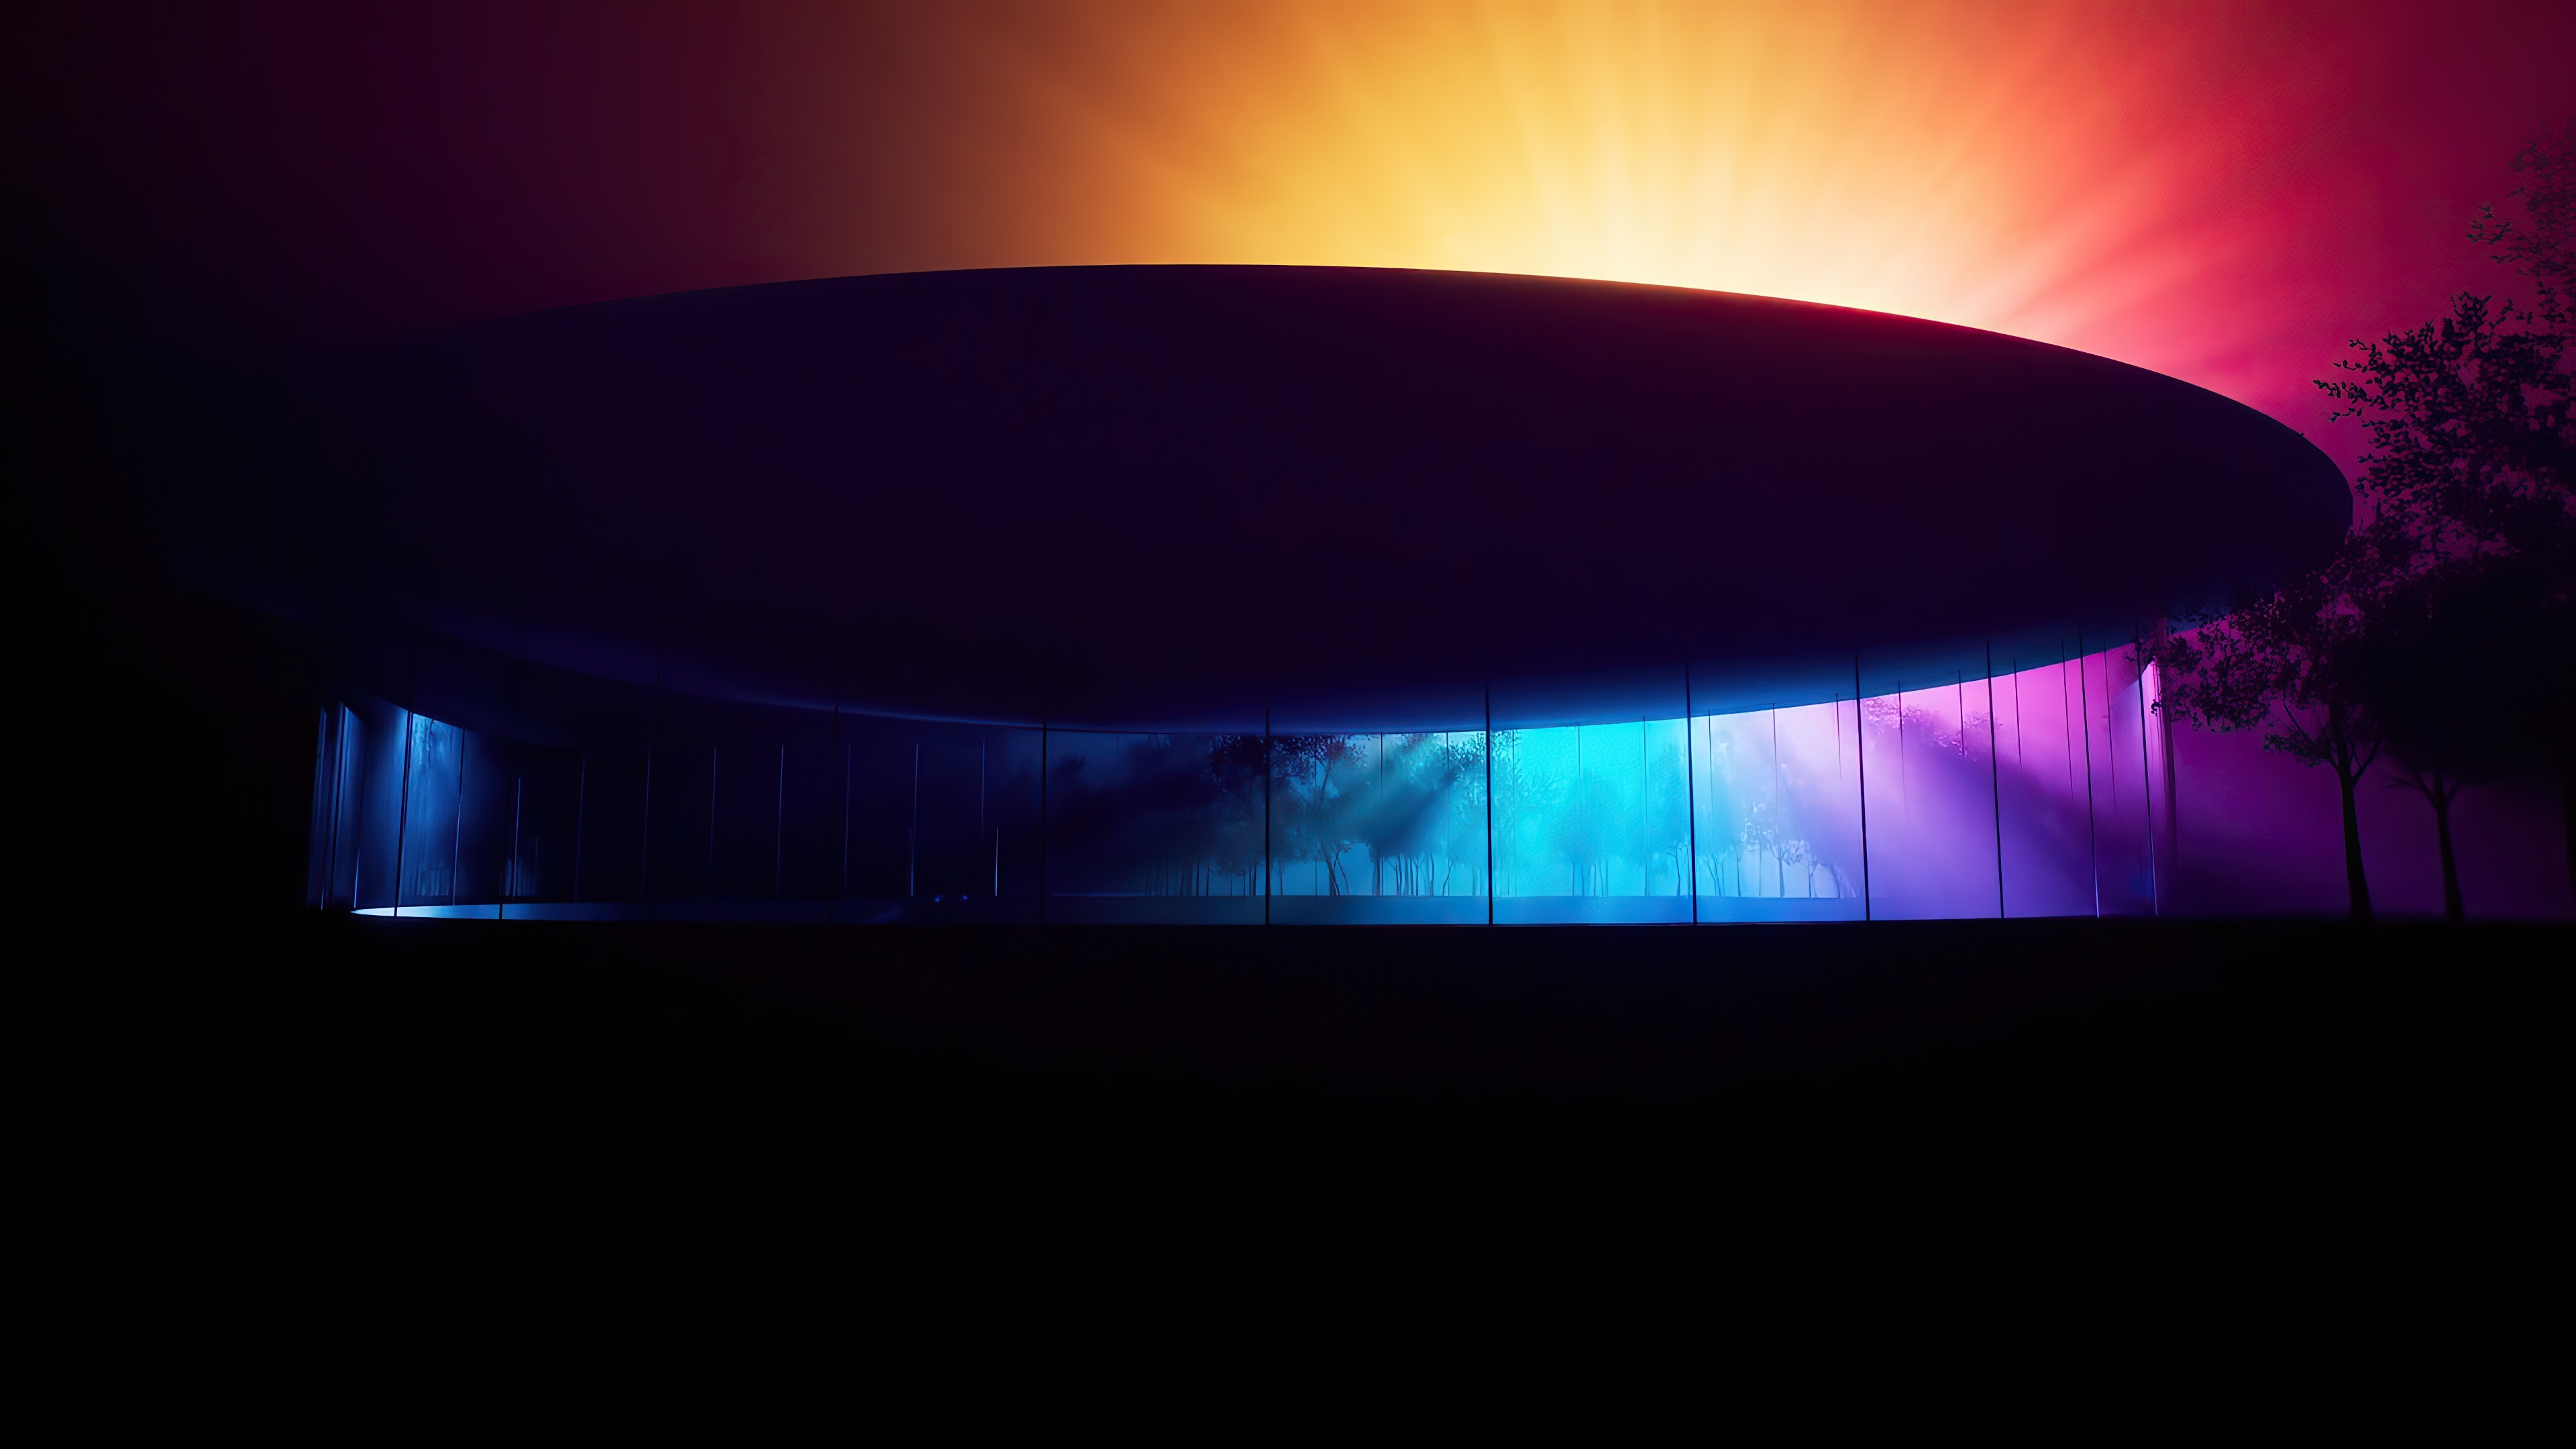 HD wallpaper, Steve Jobs Theater, Modern Architecture, Colorful Background, Apple Park